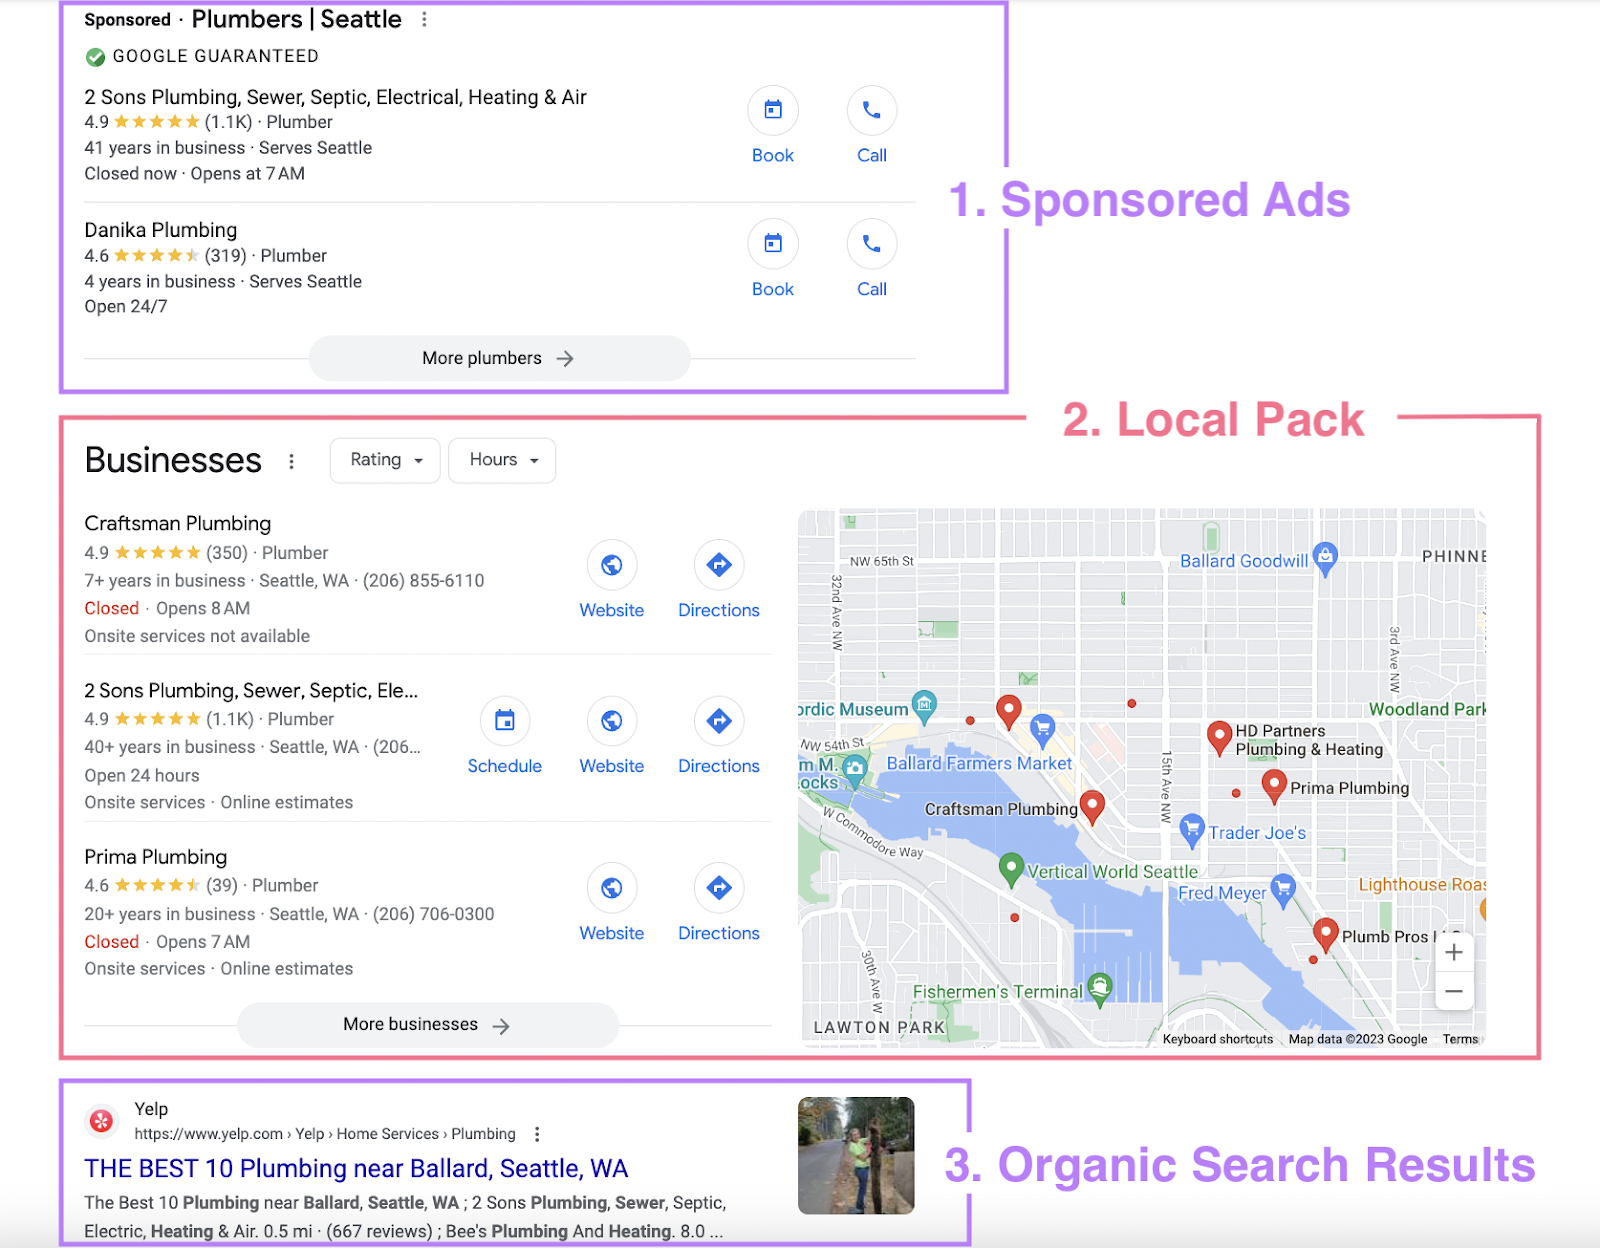 Google SERP with sponsored ads, local pack and organic search results